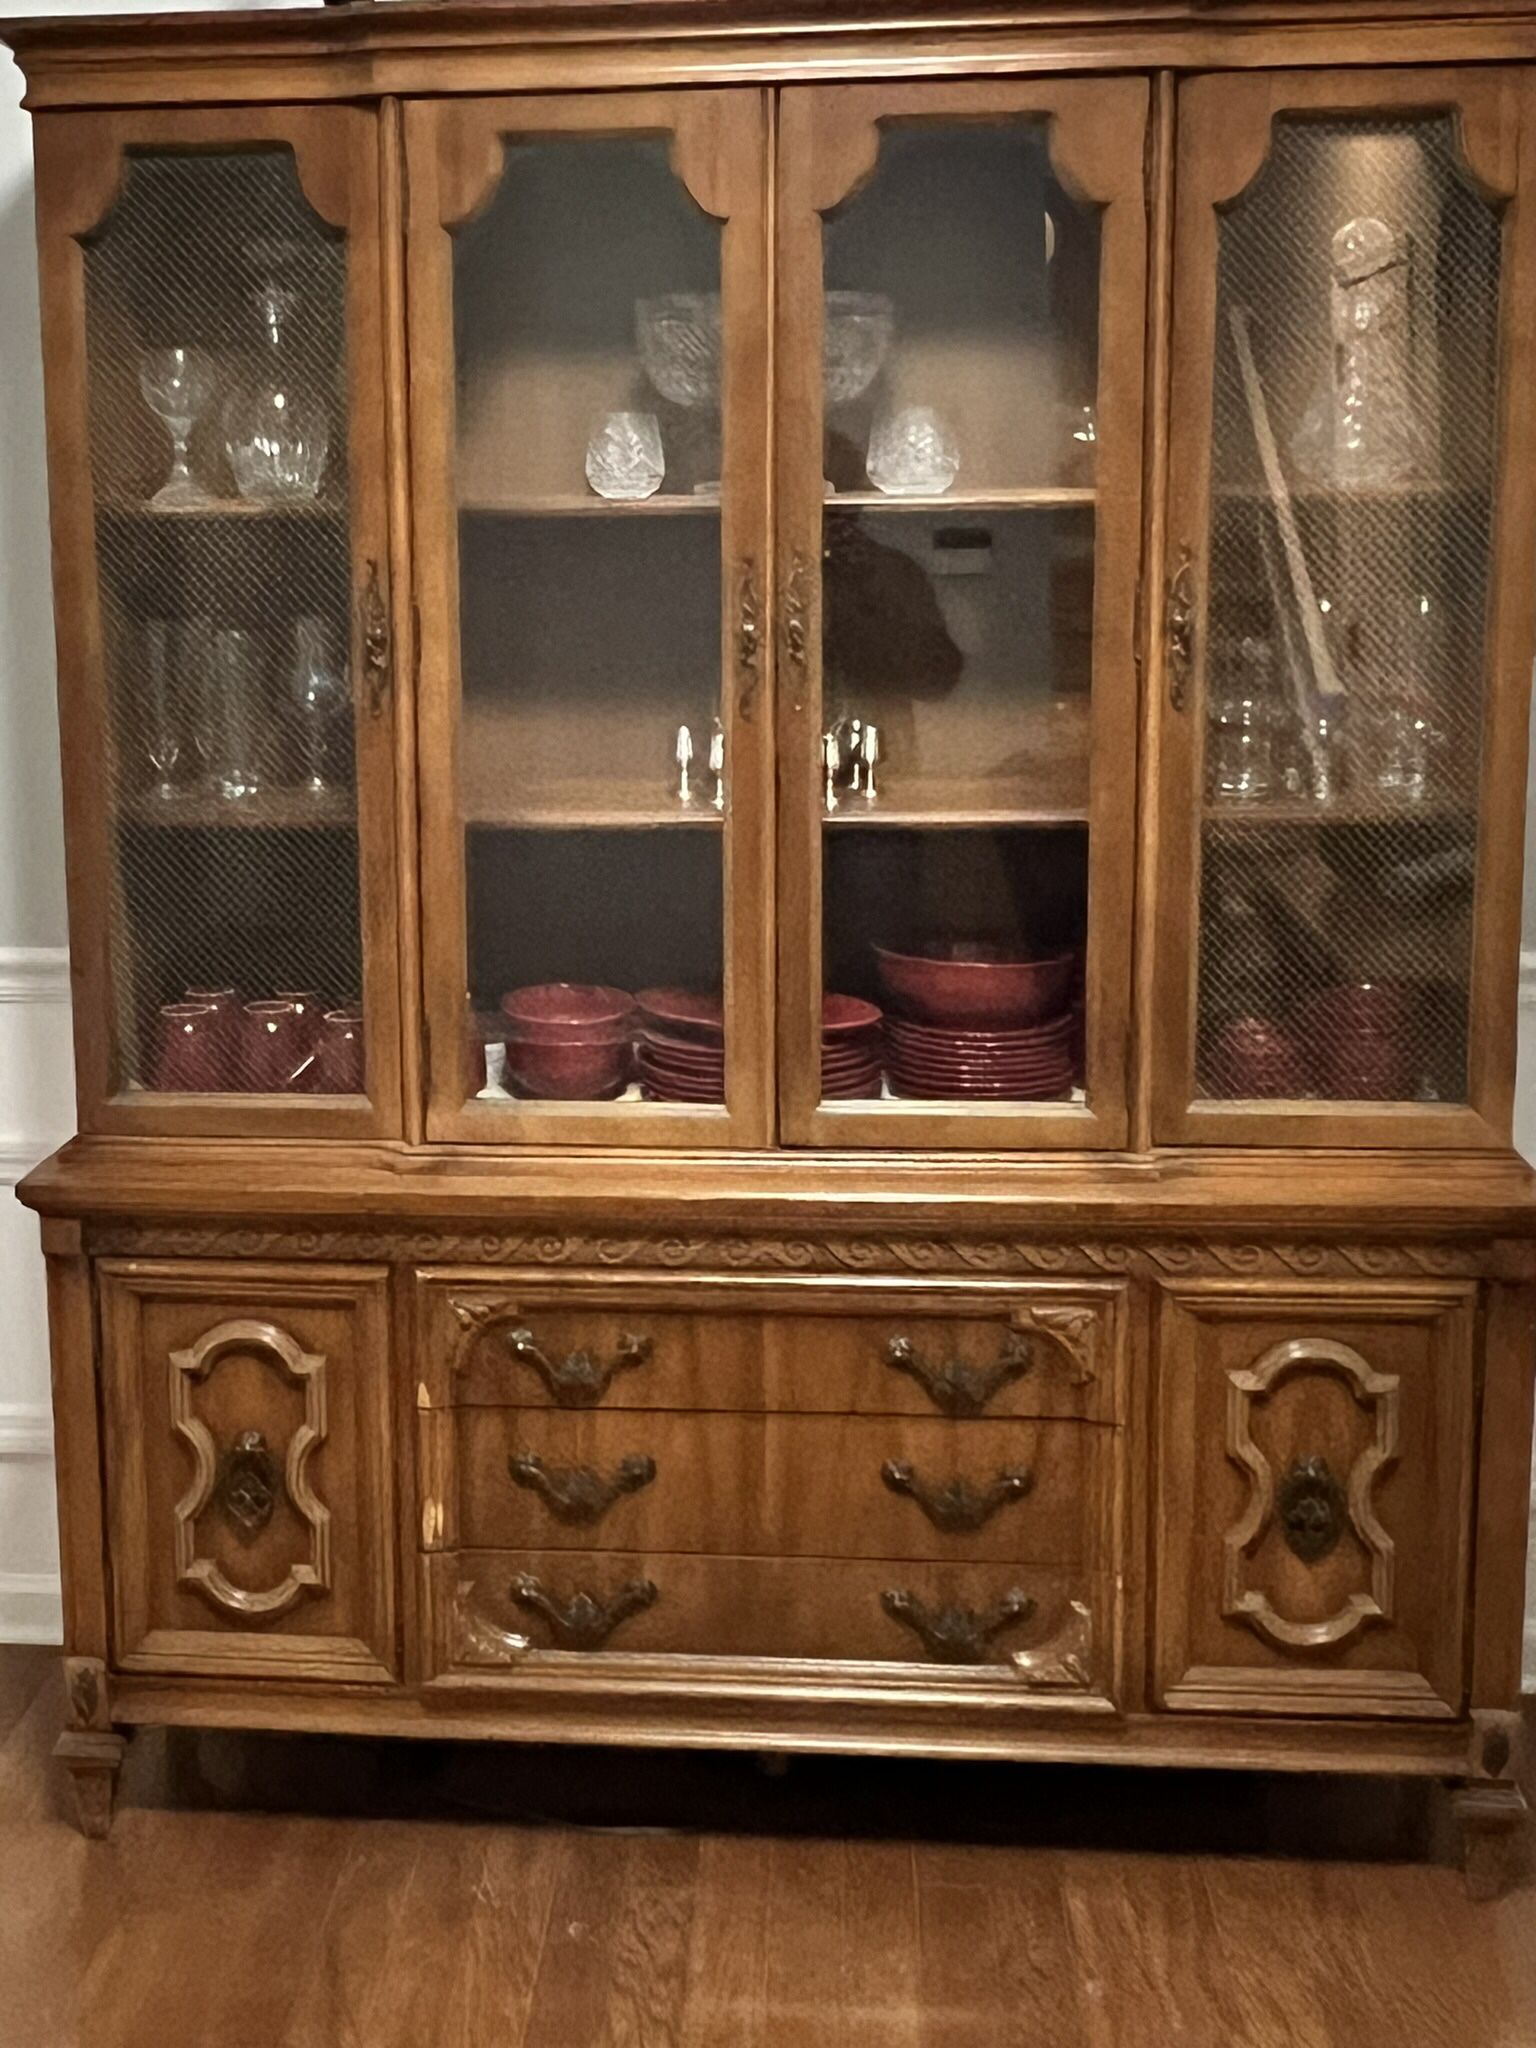 2 Piece China Hutch And Cabinet. Solid Cherry Wood. 62” Wide, 18”deep, 76” High